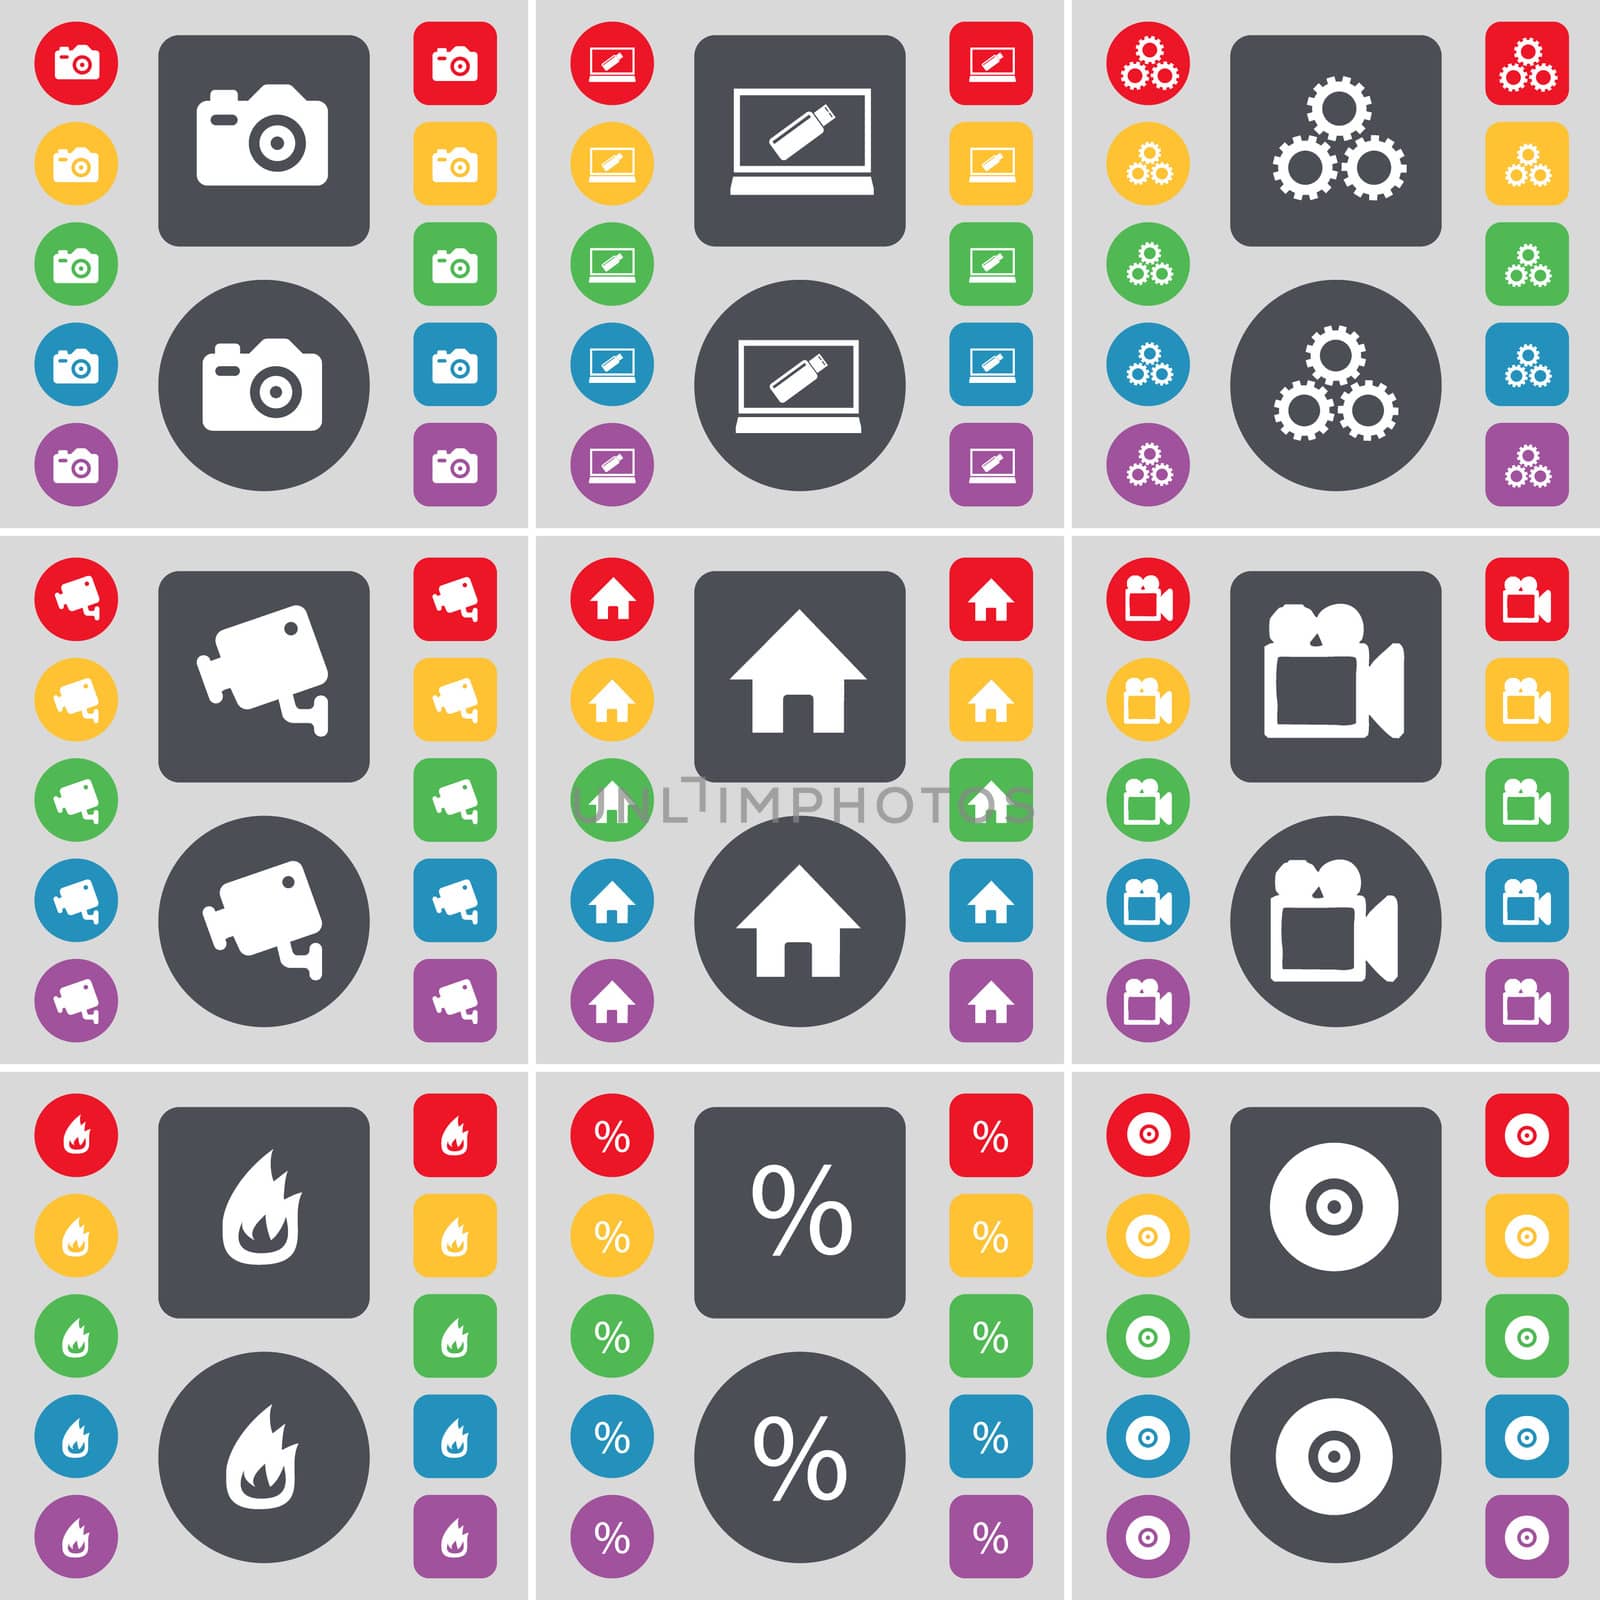 Camera, Laptop, Gear, CCTV, House, Film camera, Fire, Percent, Disk icon symbol. A large set of flat, colored buttons for your design.  by serhii_lohvyniuk